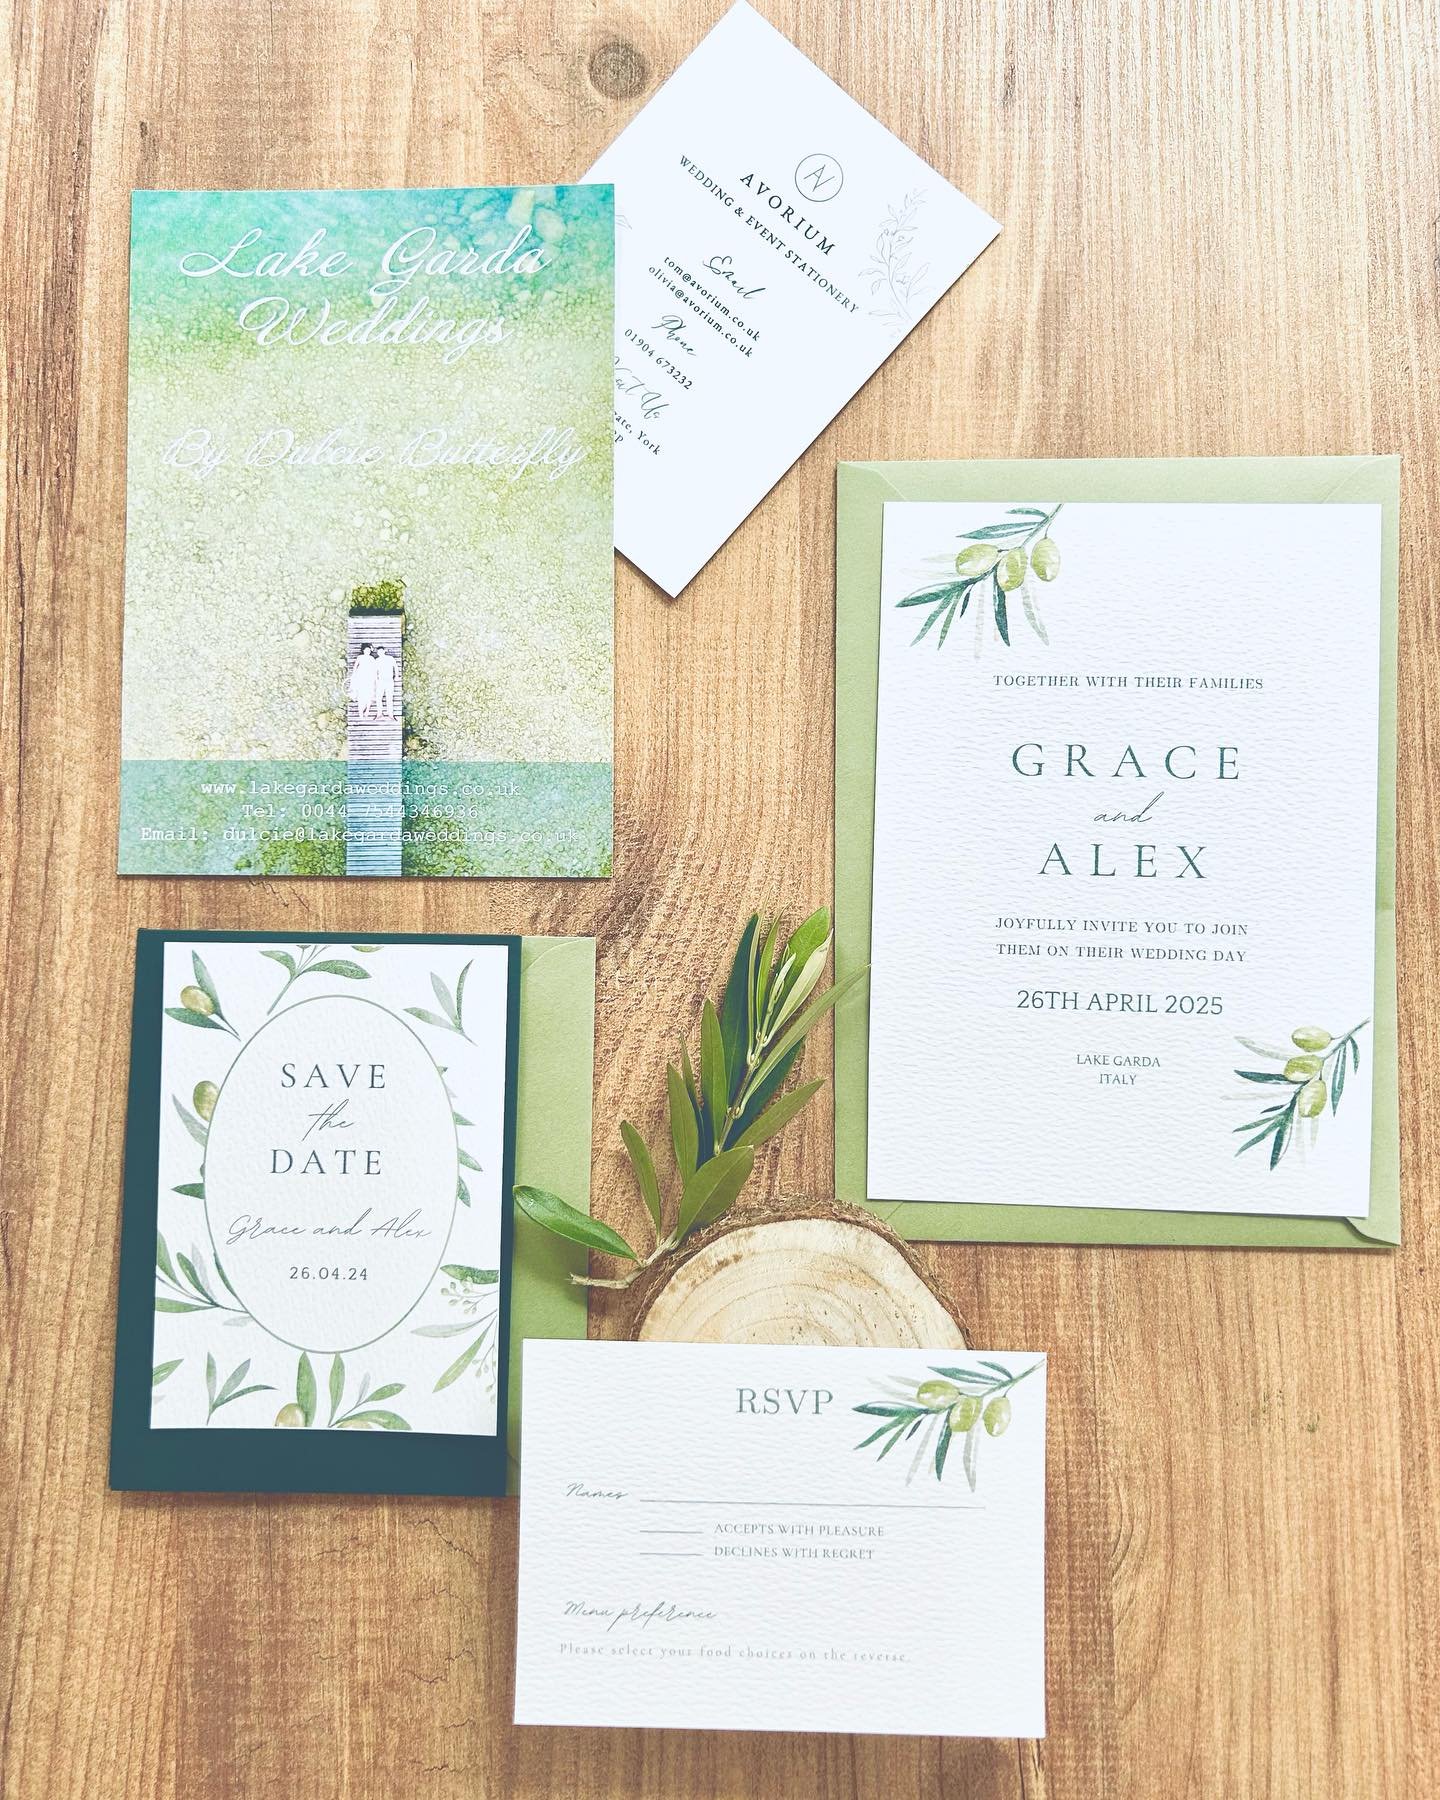 The little details sometimes make all the difference , finding the best invitations to suit your personal style and creating a imaginary little story to lead  your guests into the dream of your wedding day to follow , Olivia @avorium_ can help with a